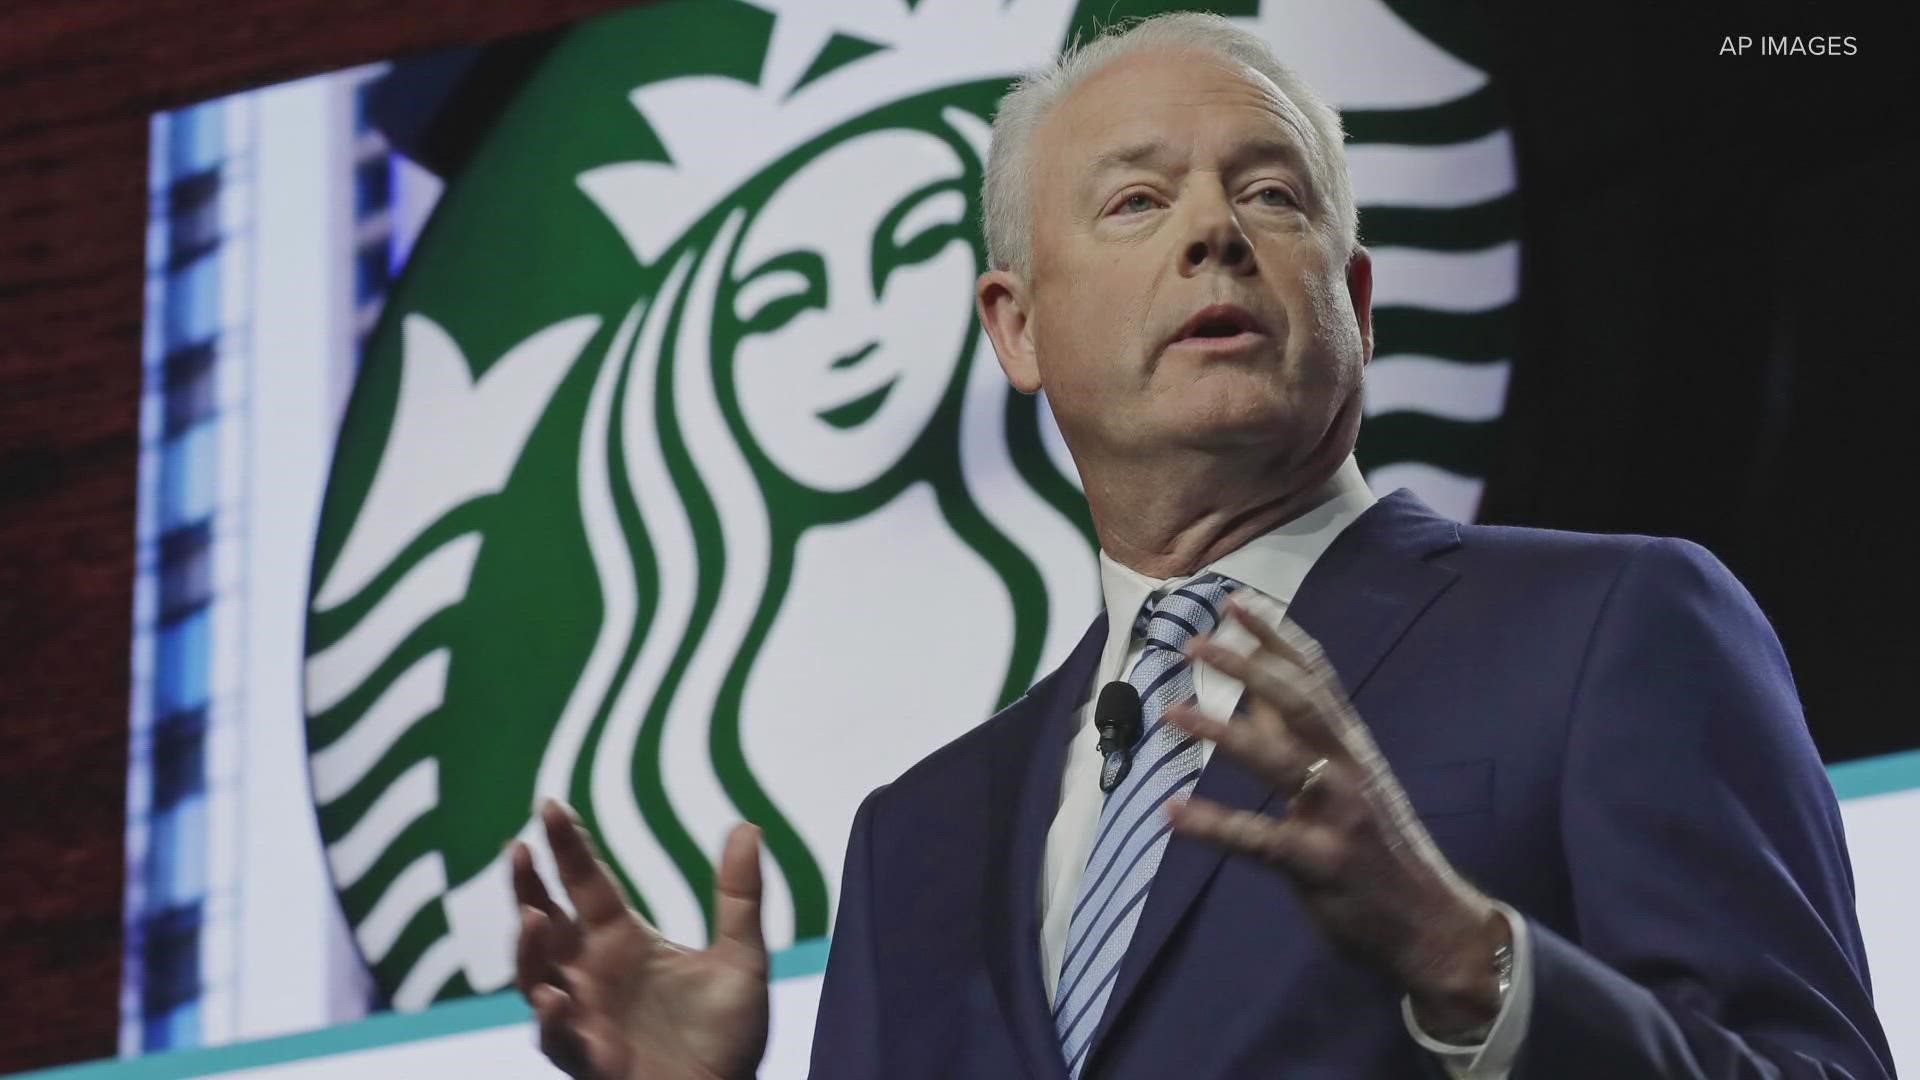 Kevin Johnson said he will retire next month after five years as CEO and 13 at Starbucks.